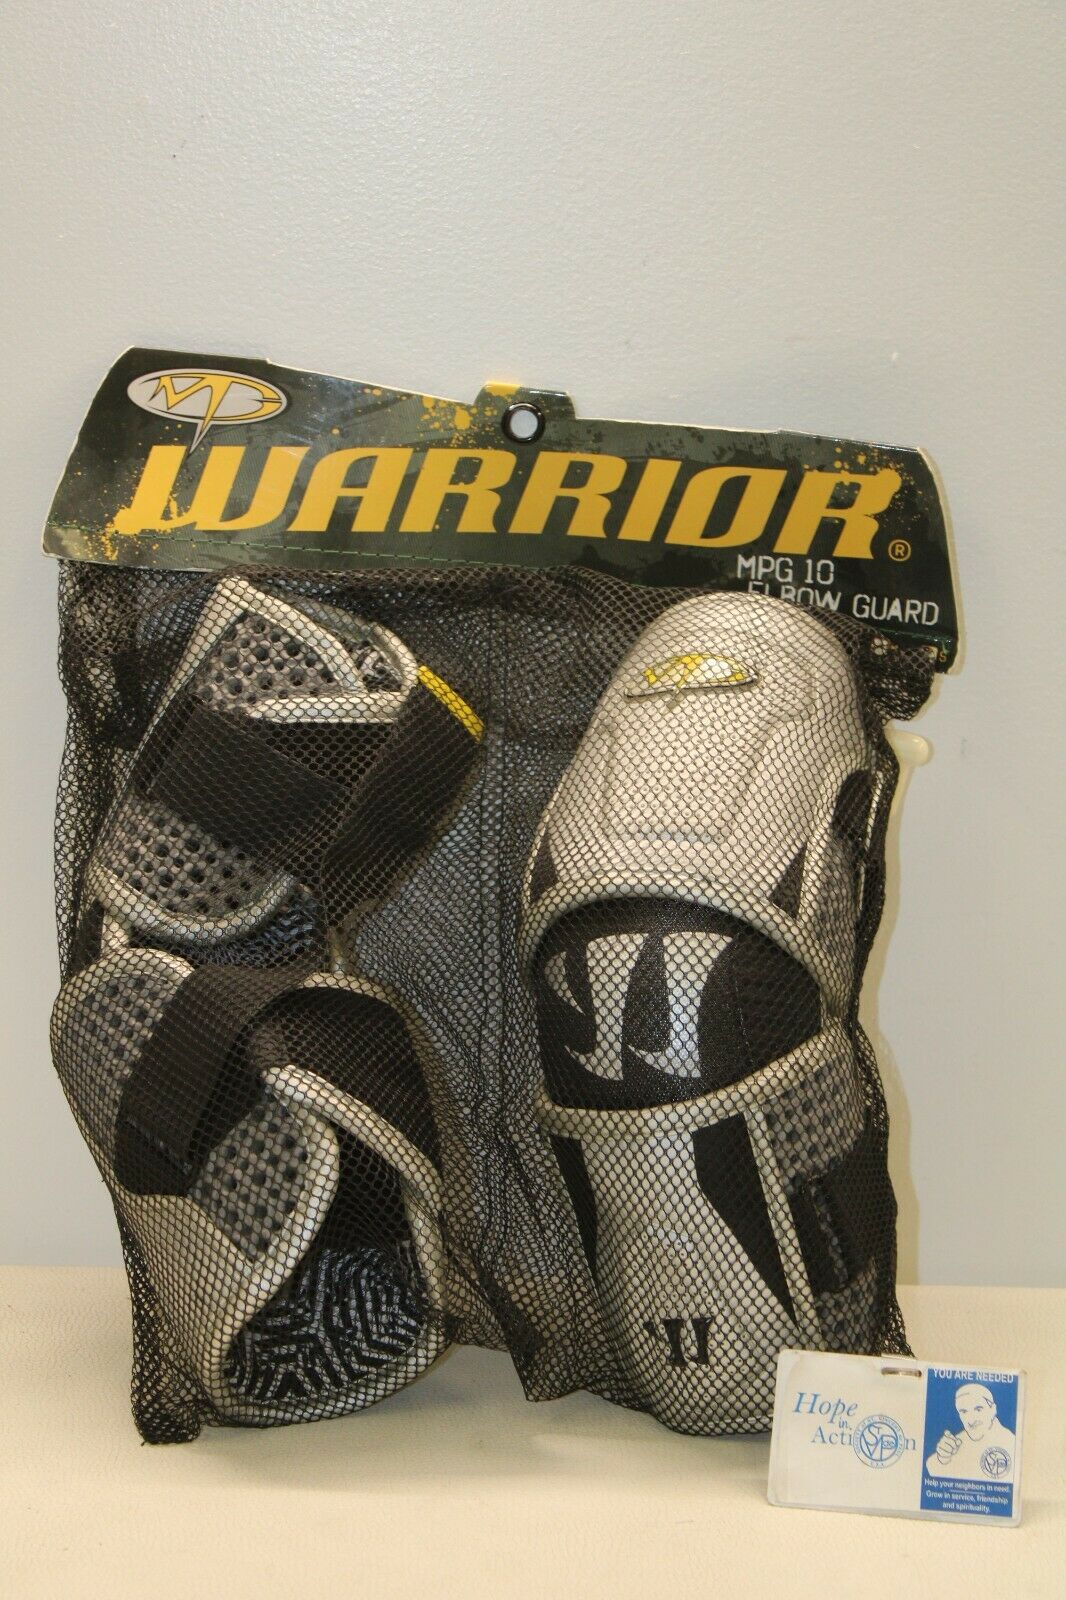 New Warrior Mpg10 Size Large Lacrosse Elbow Guard L